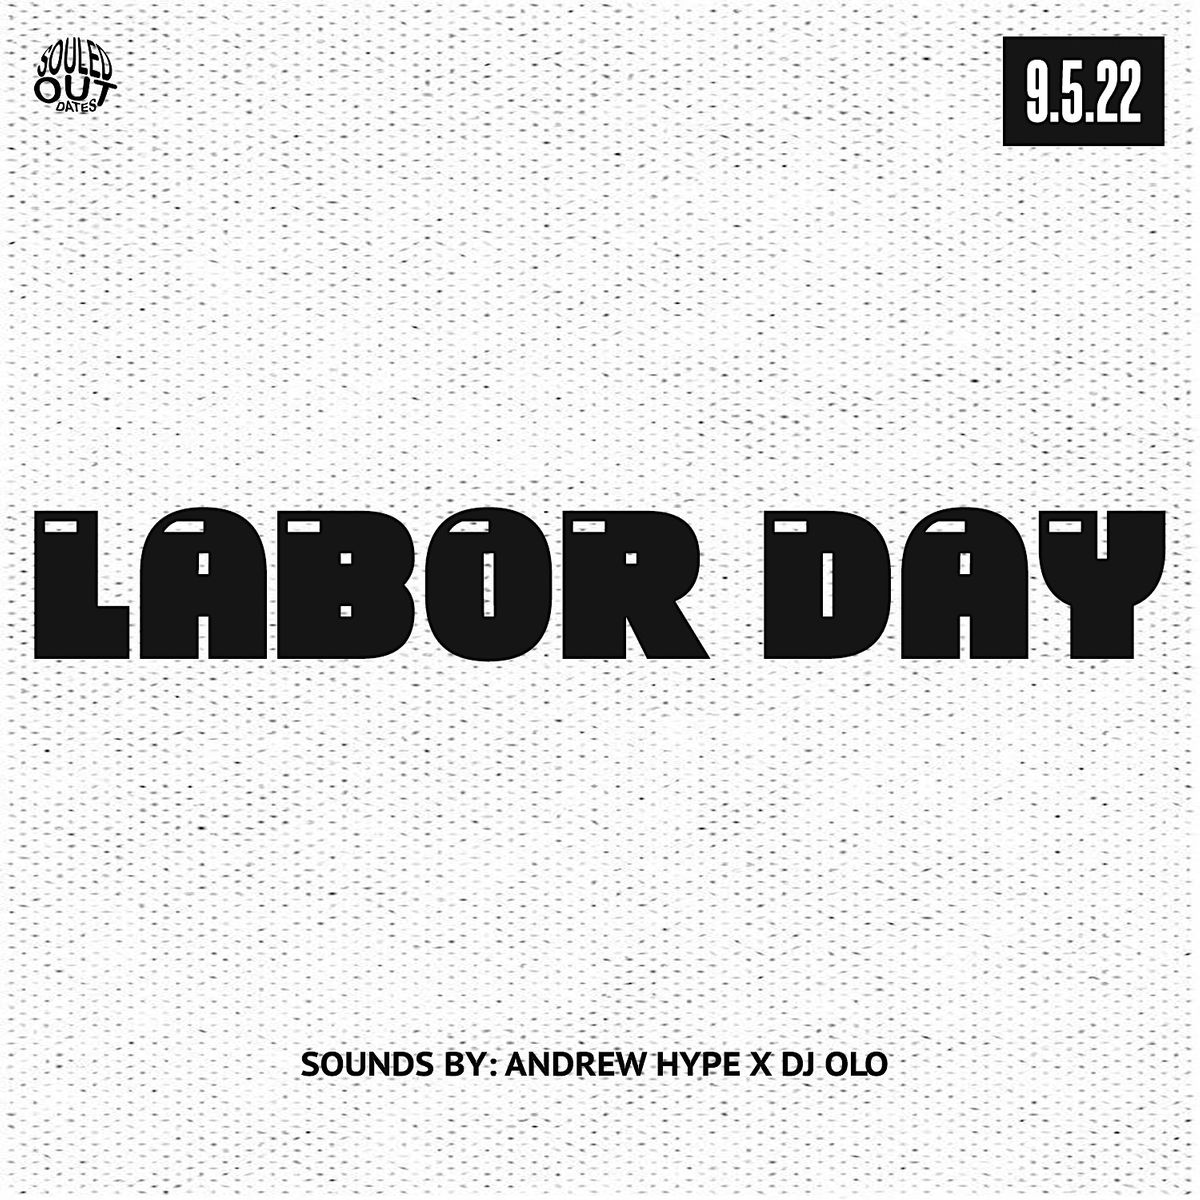 SOULED OUT LABOR DAY- D.C